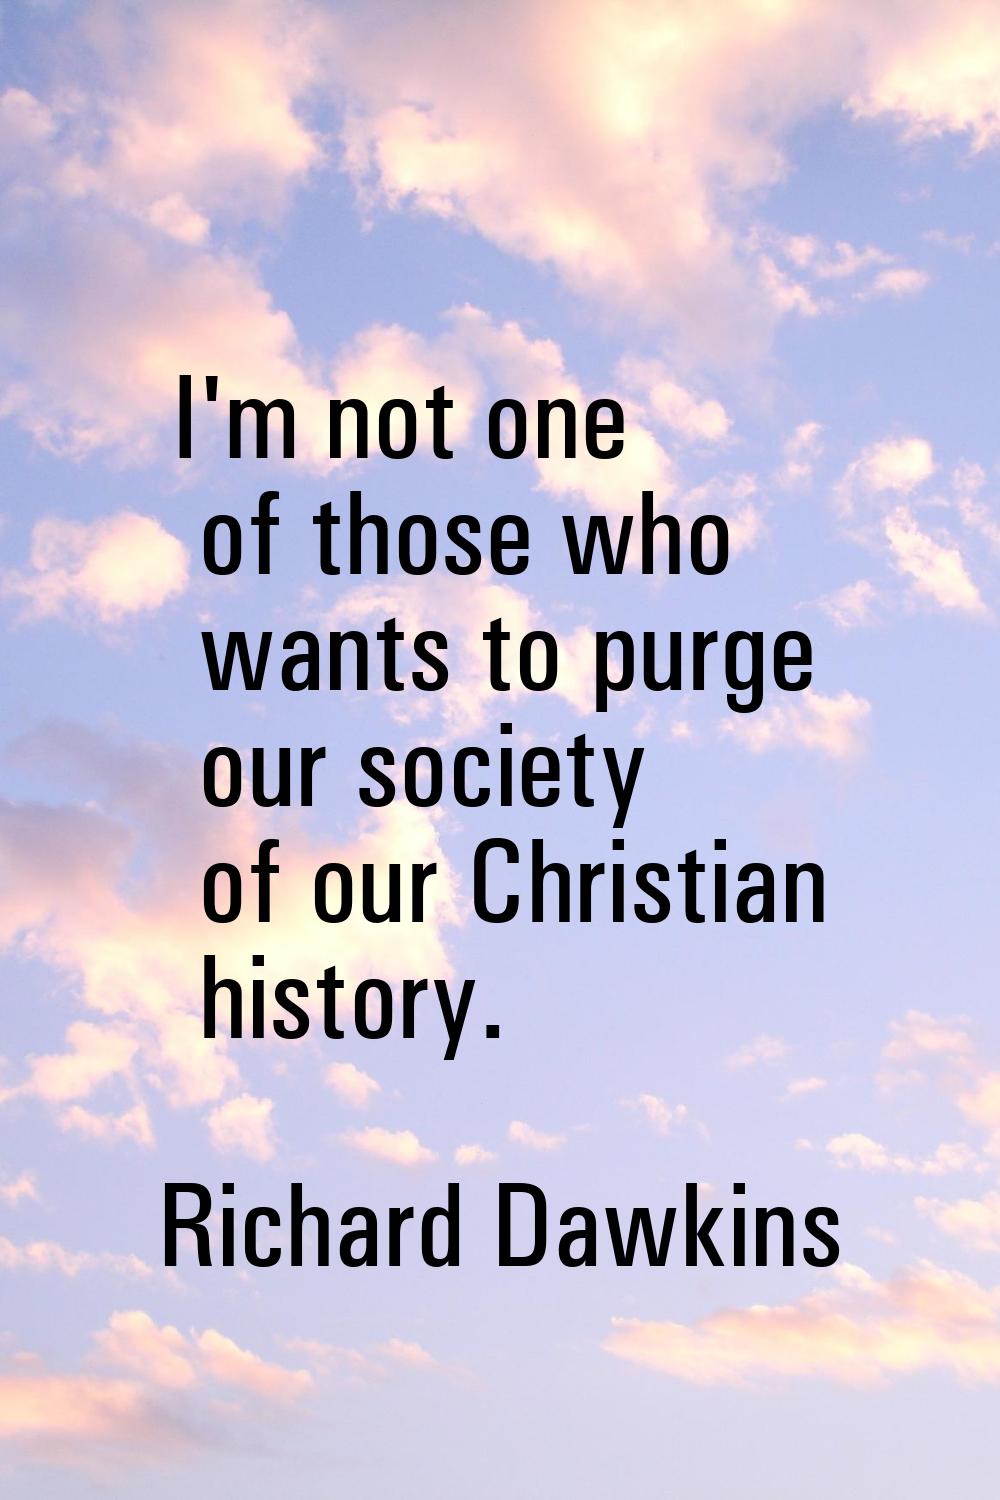 I'm not one of those who wants to purge our society of our Christian history.